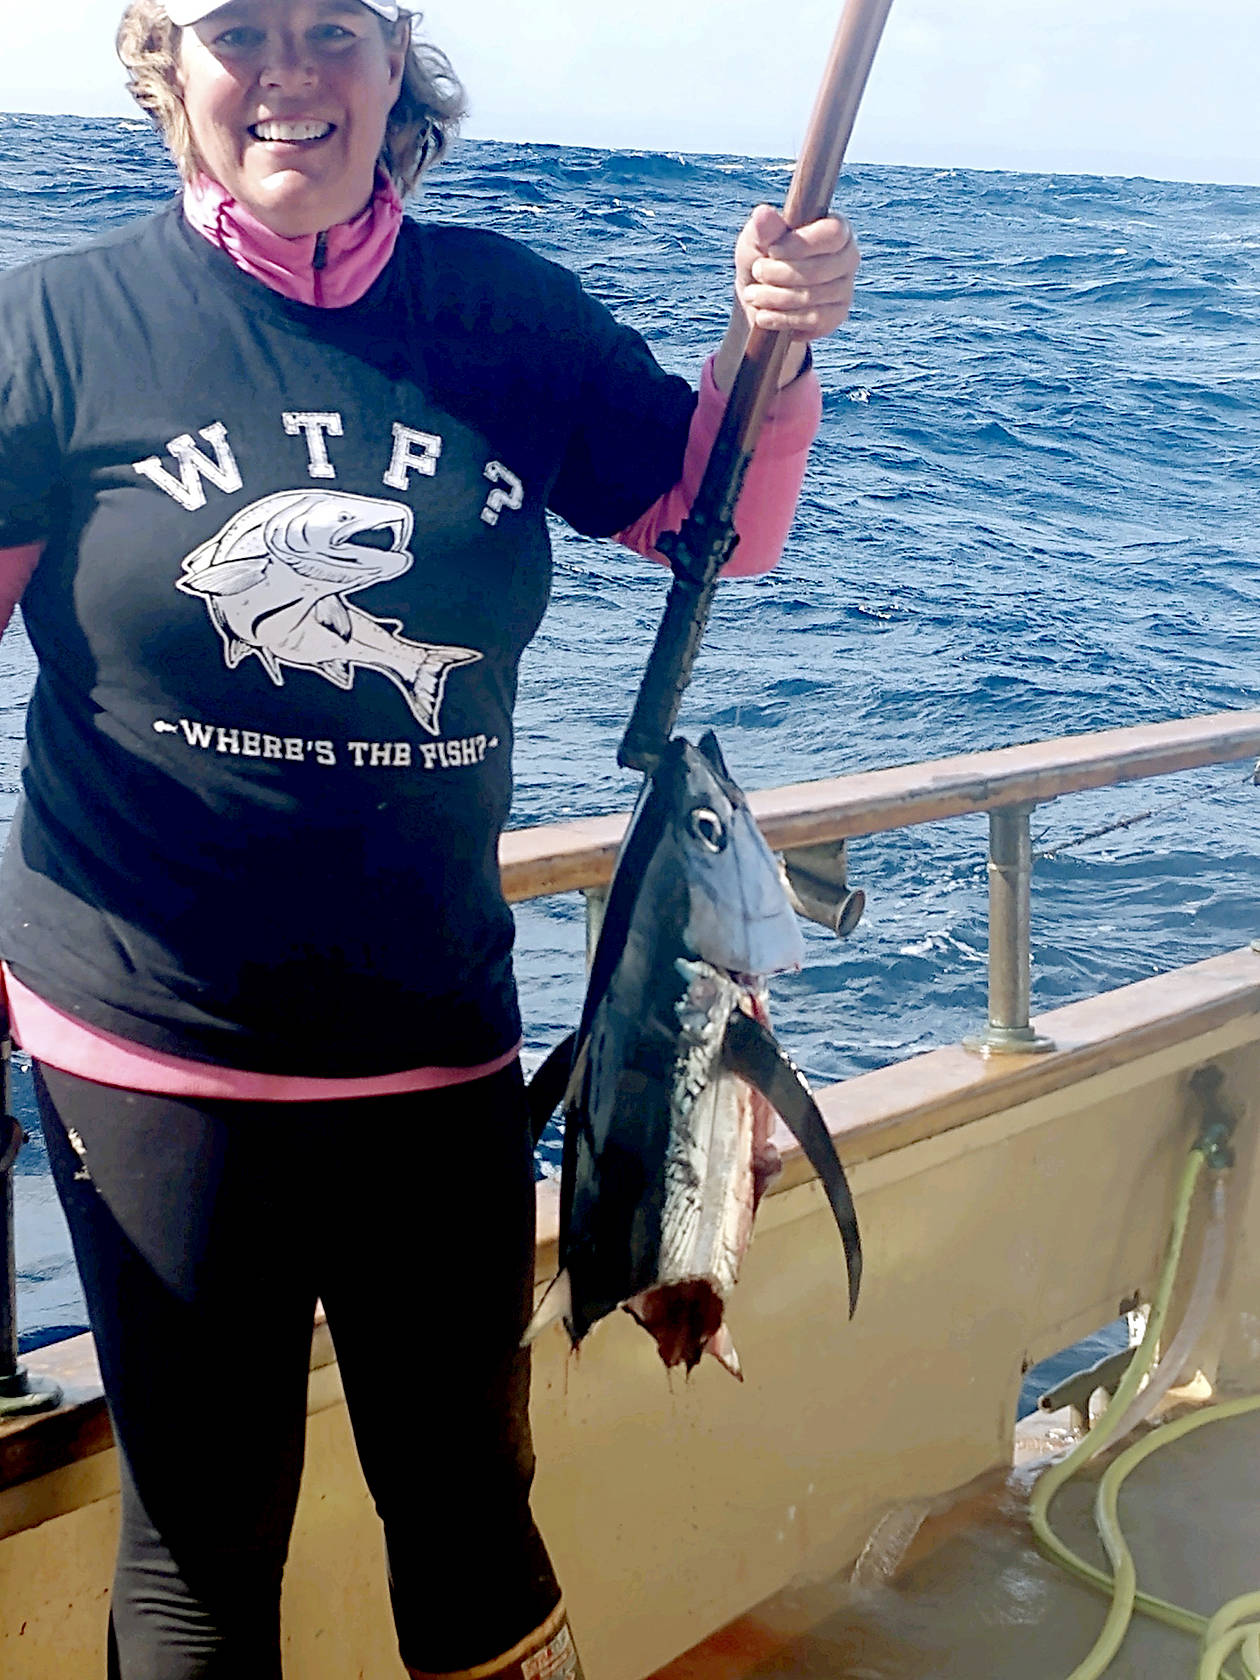 Port Townsend’s Brenda Burke fished for tuna 55 miles off of Westport with nine friends last week. The group caught 220 albacore tuna. Burke said the catch would have been 221 but a blue shark decided it wanted a meal.